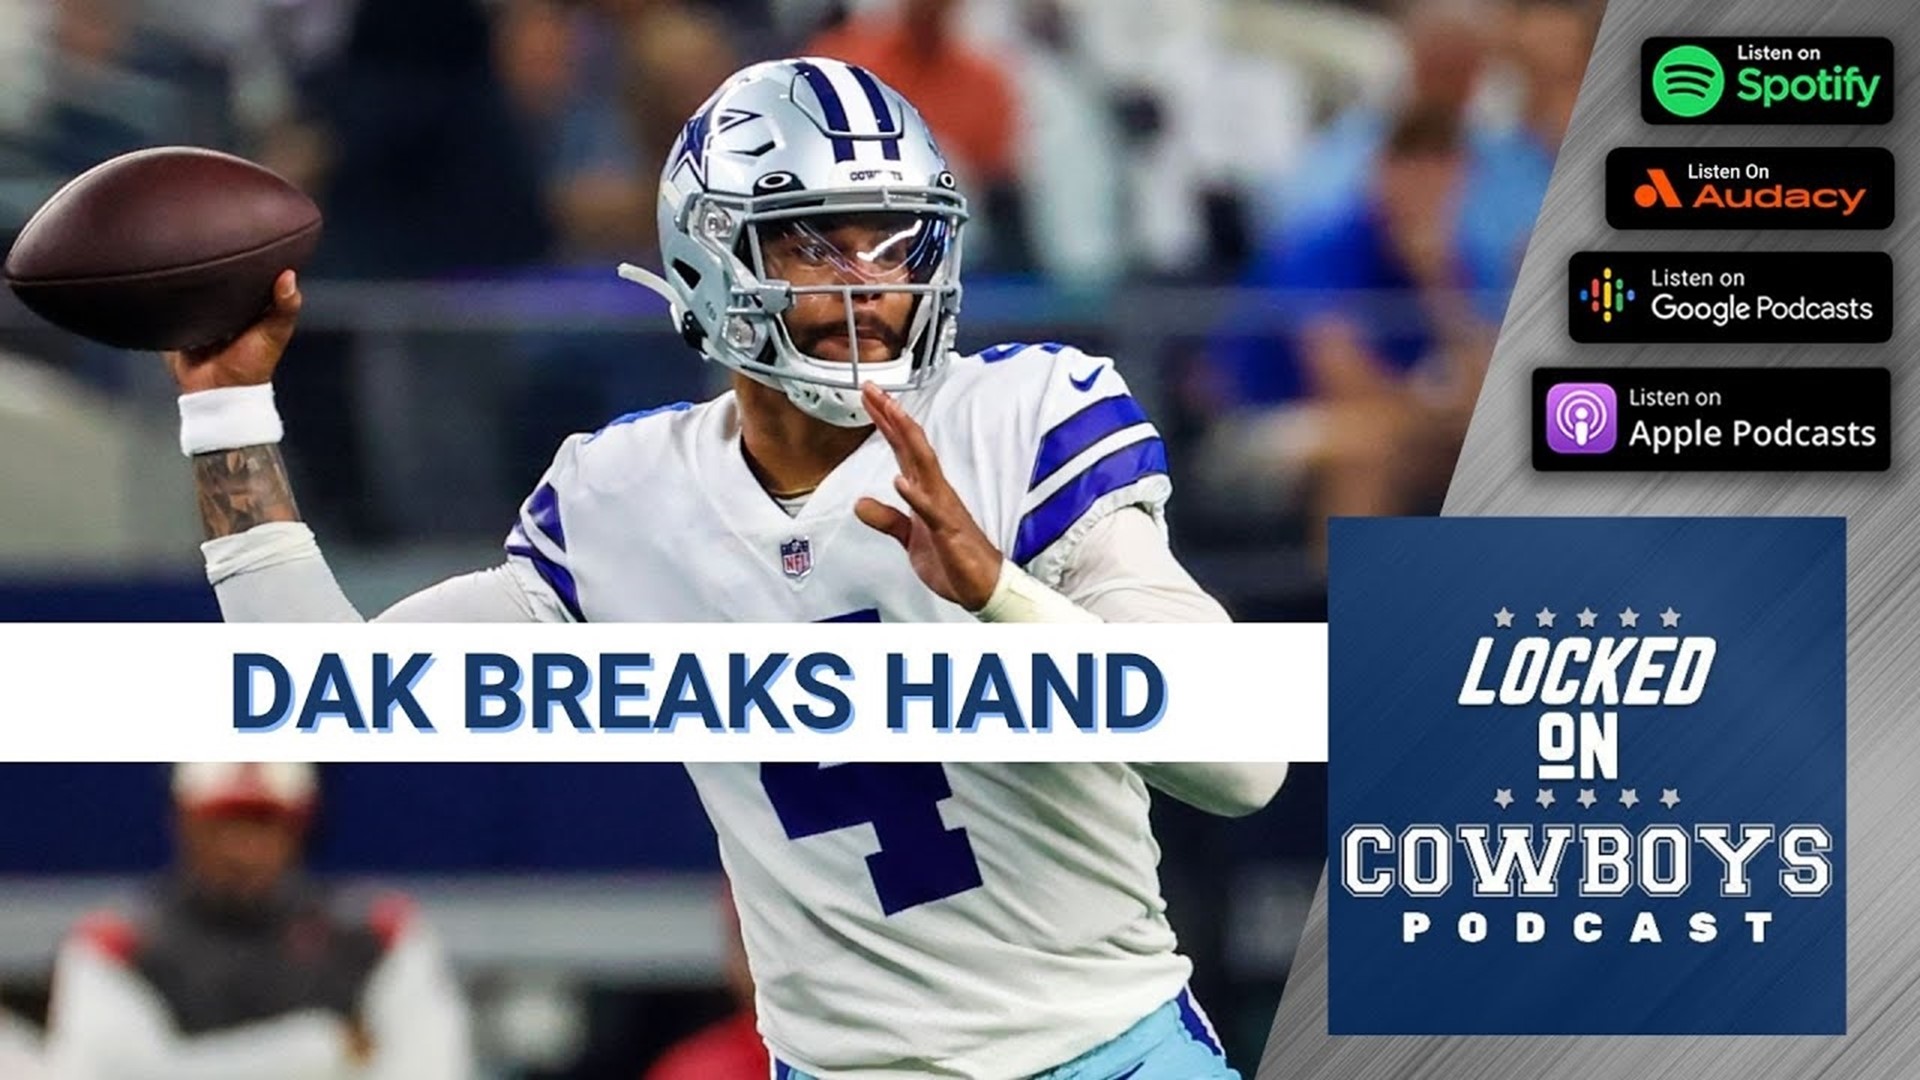 Marcus Mosher and Landon McCool discuss the Dallas Cowboys falling to the Tampa Bay Buccaneers in Week 1 and Dak Prescott's hand injury.